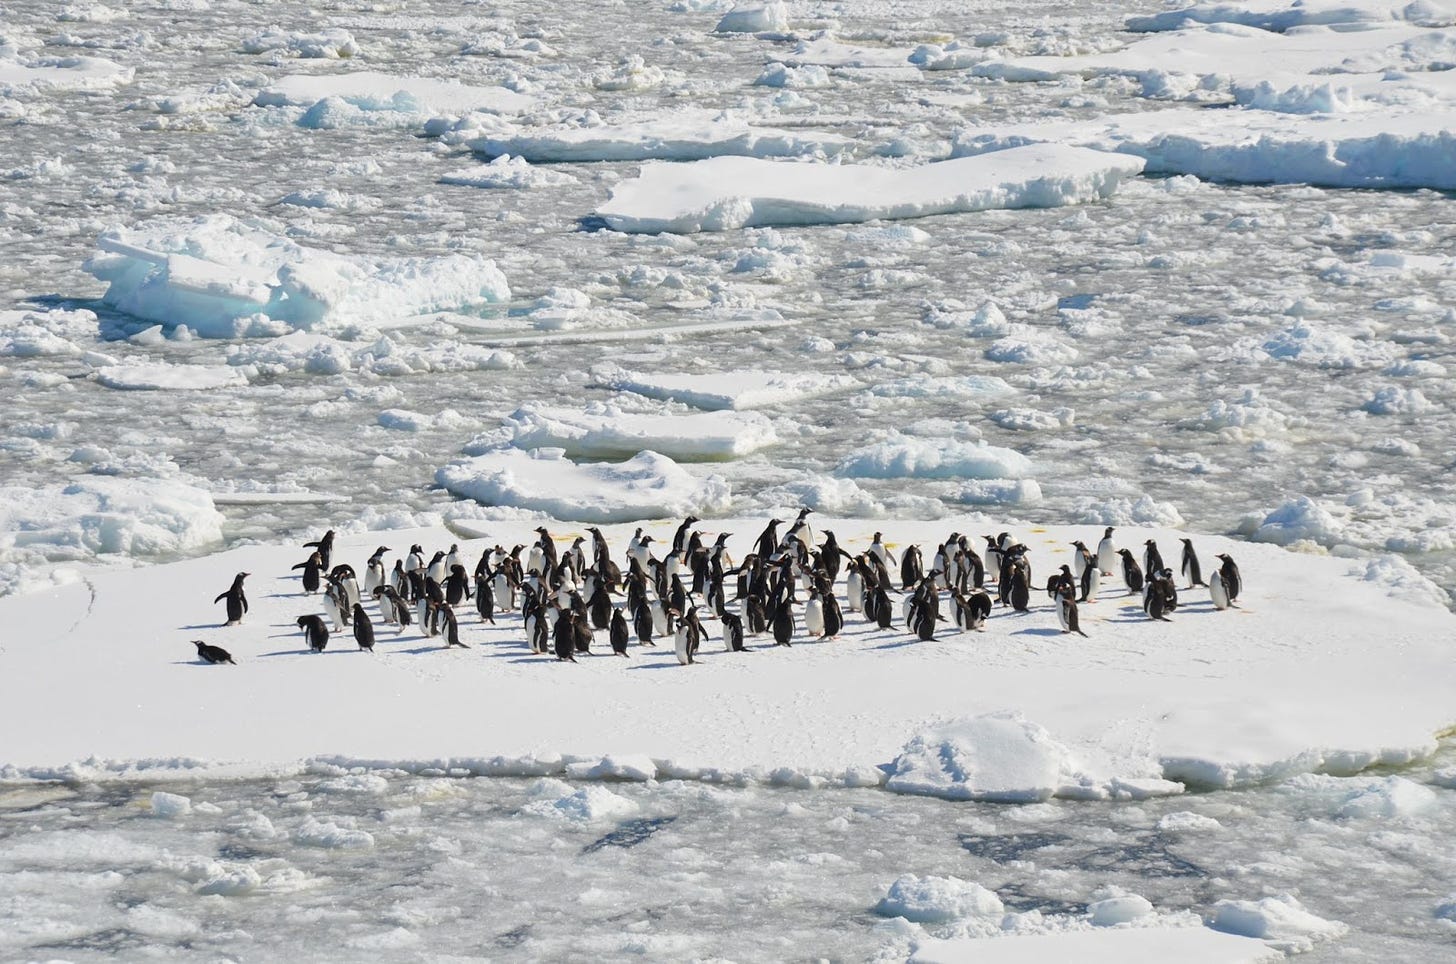 Big group of penguins on a chunk of ice in the middle of an icy ocean